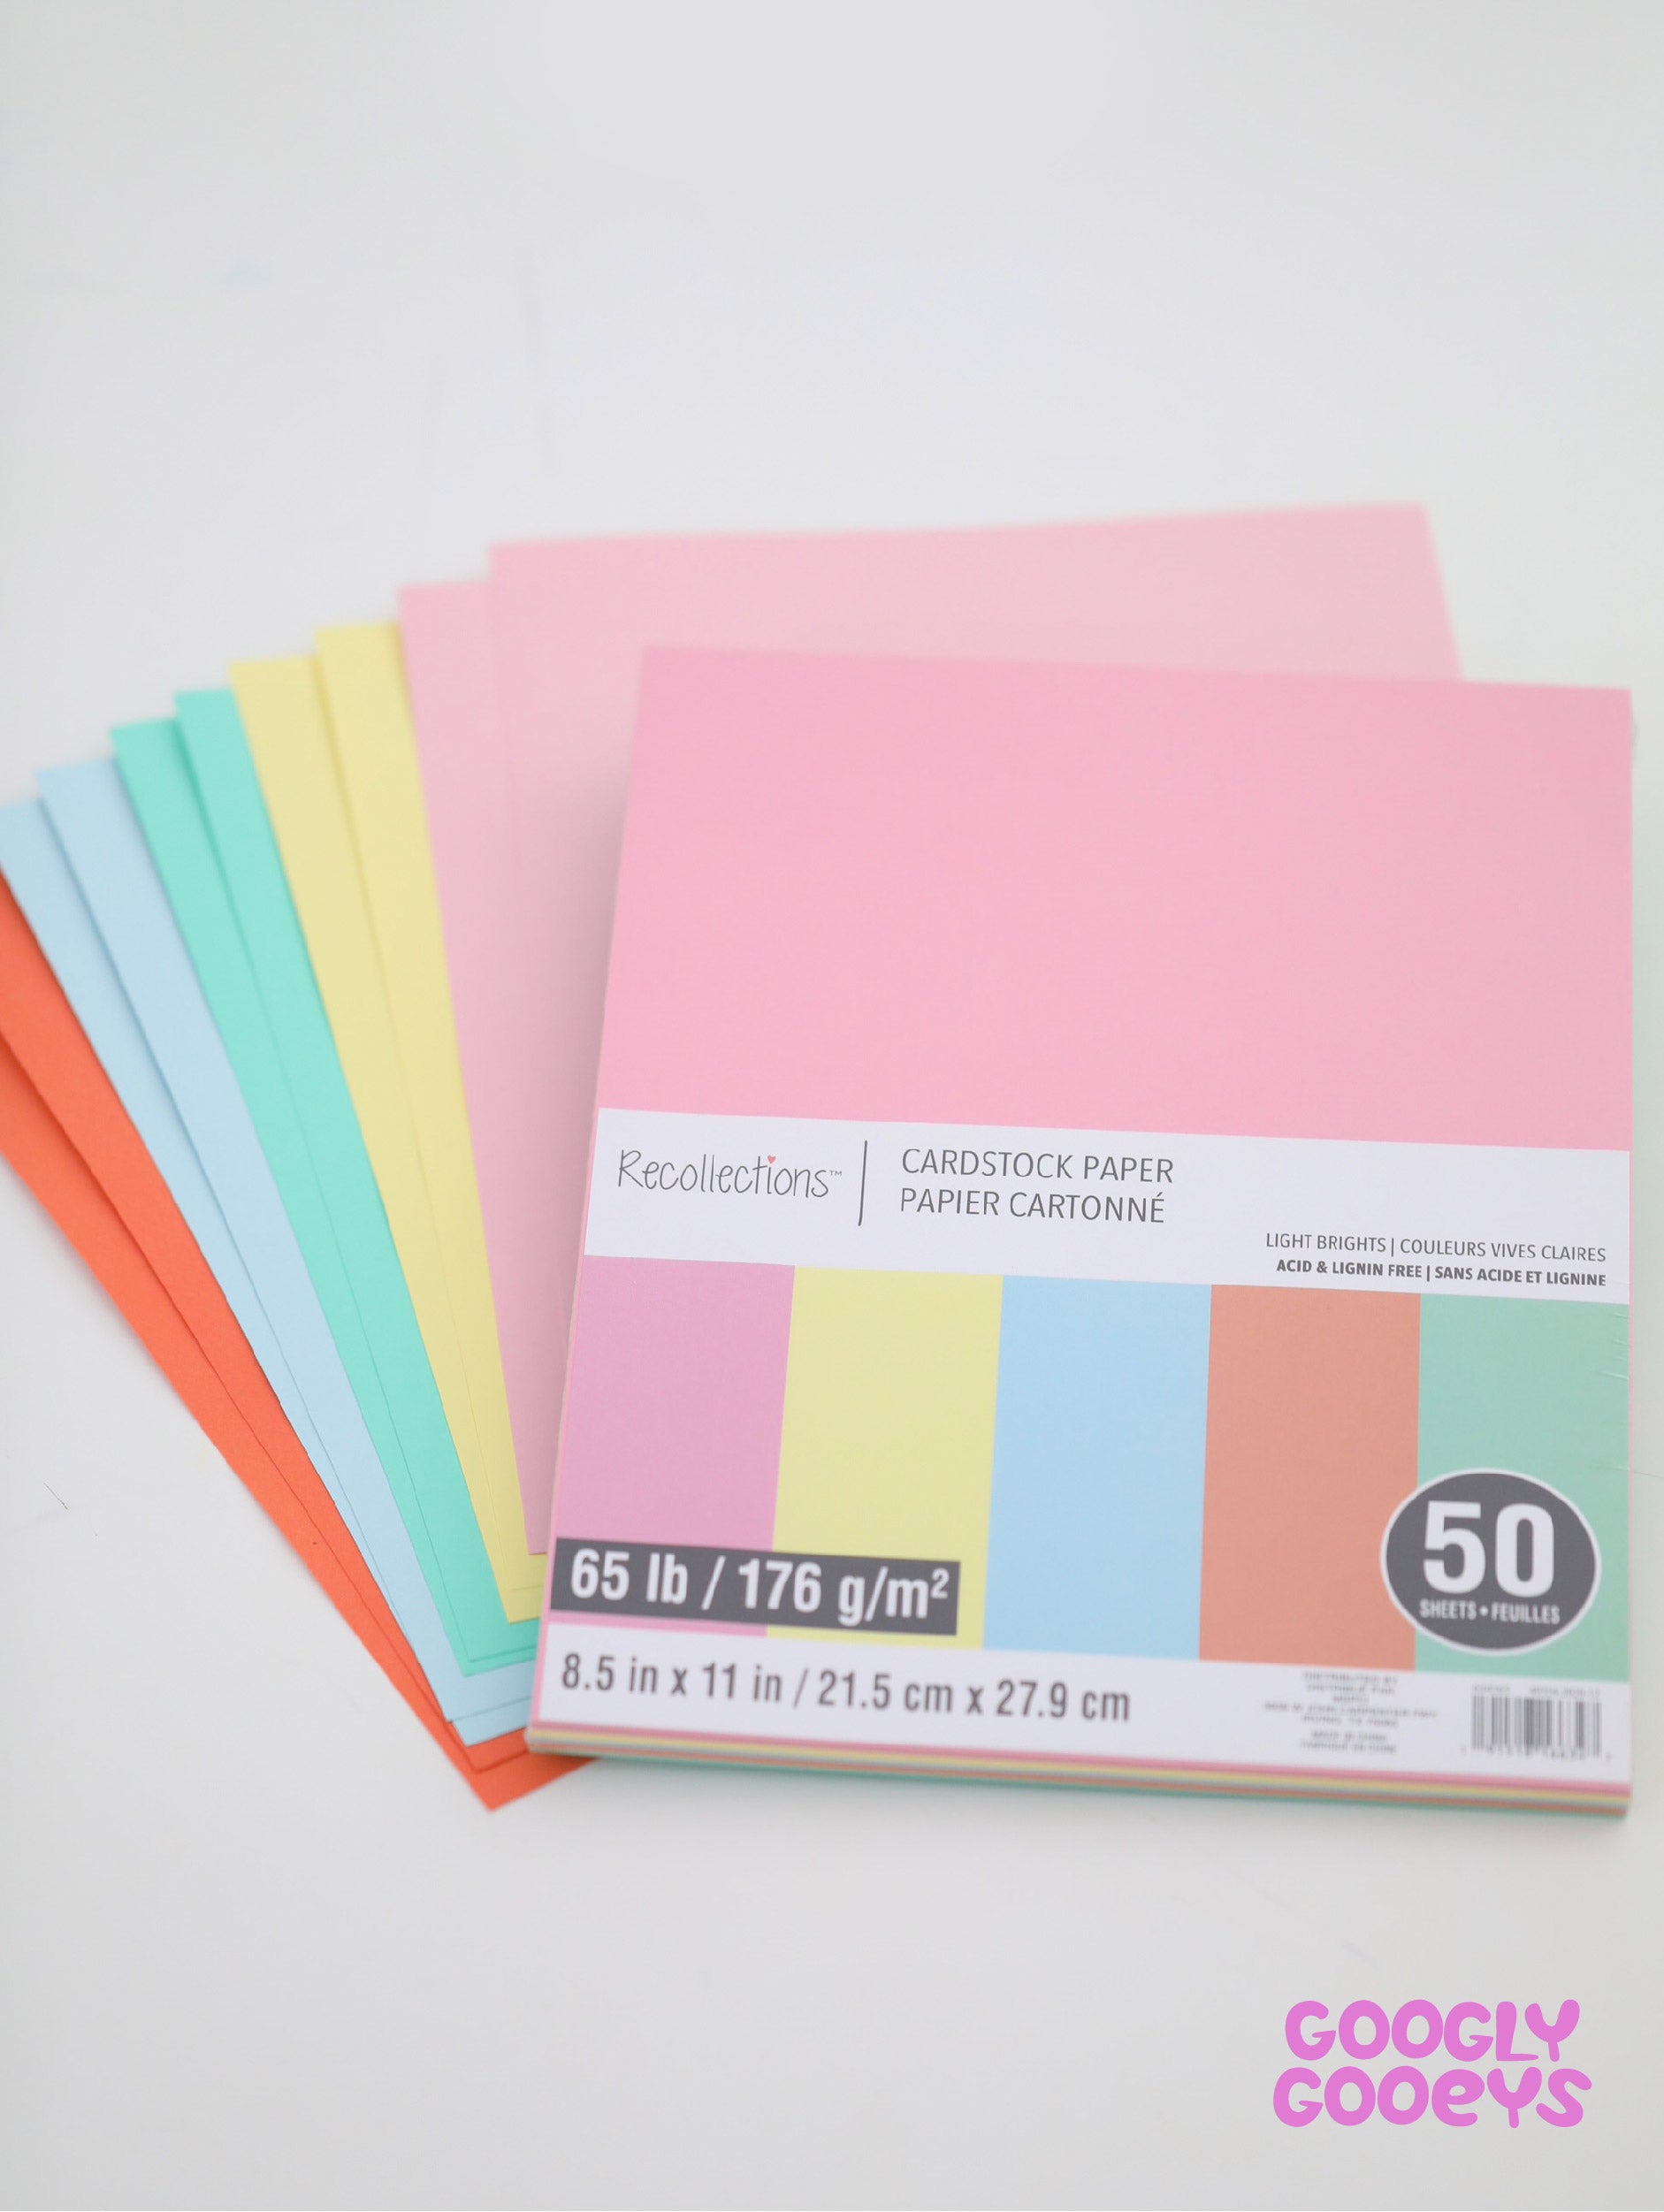 Recollections Cardstock Paper | Light Brights